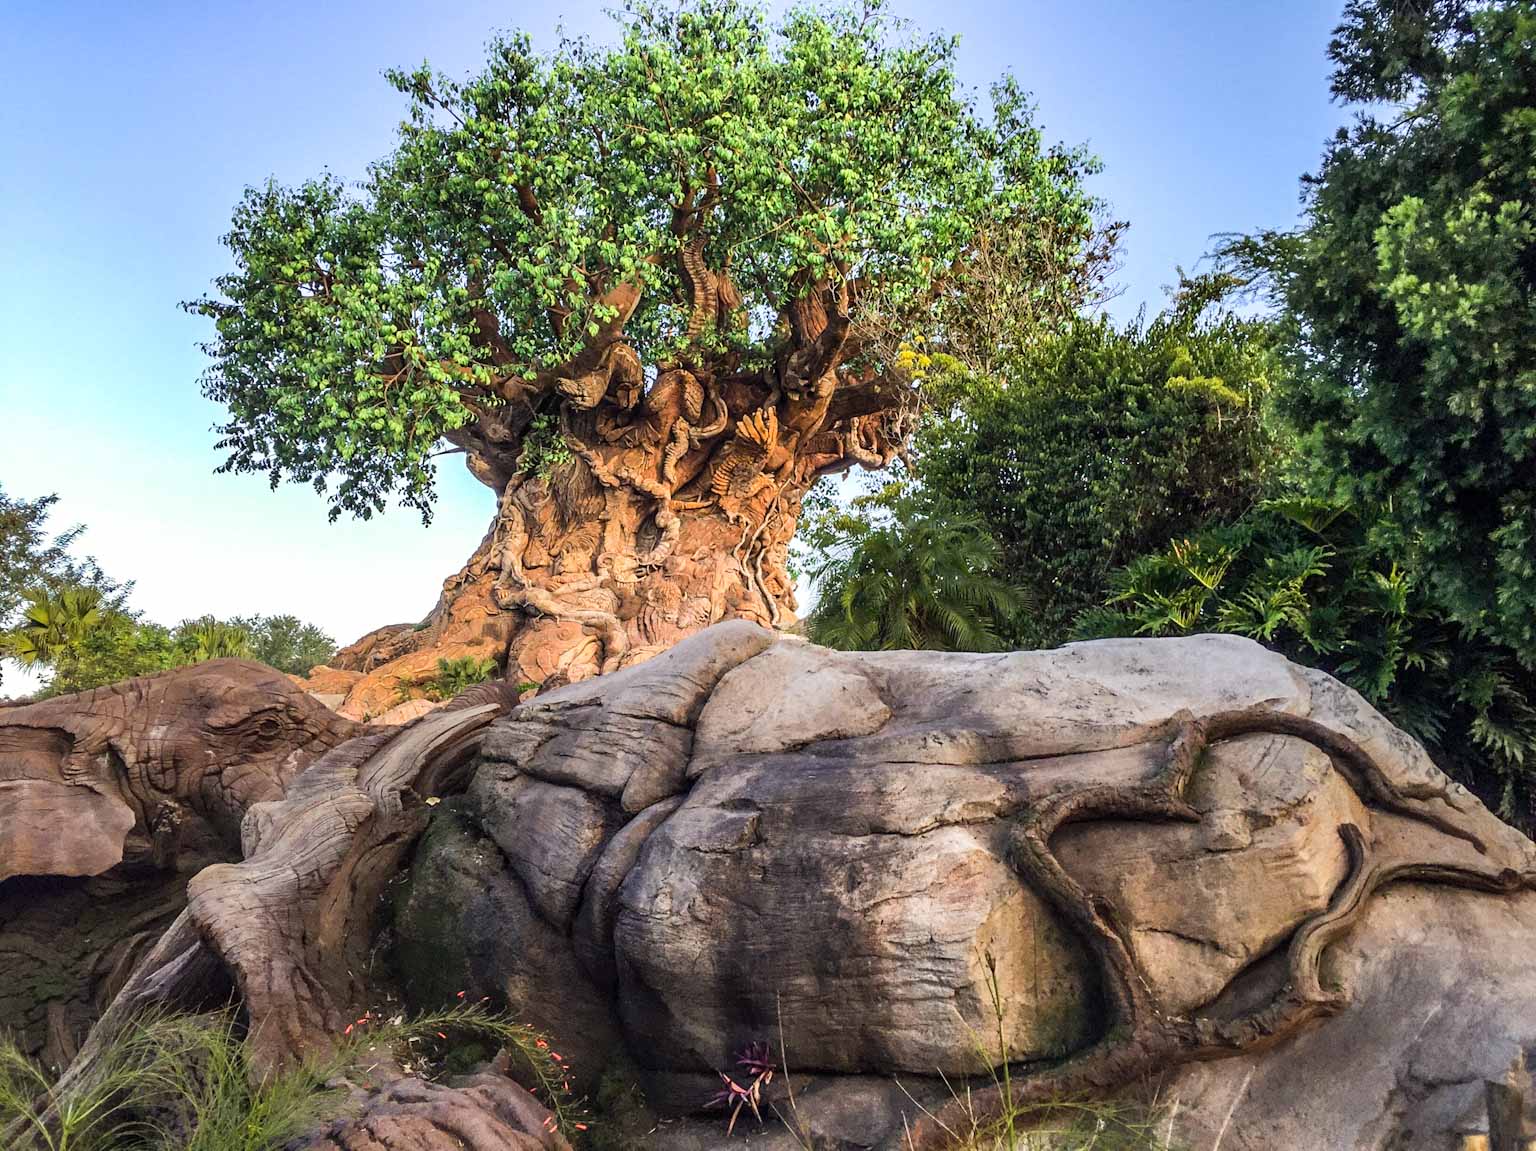 Is Walt Disney World Animal Kingdom Worth It? Yes, and Here's Why